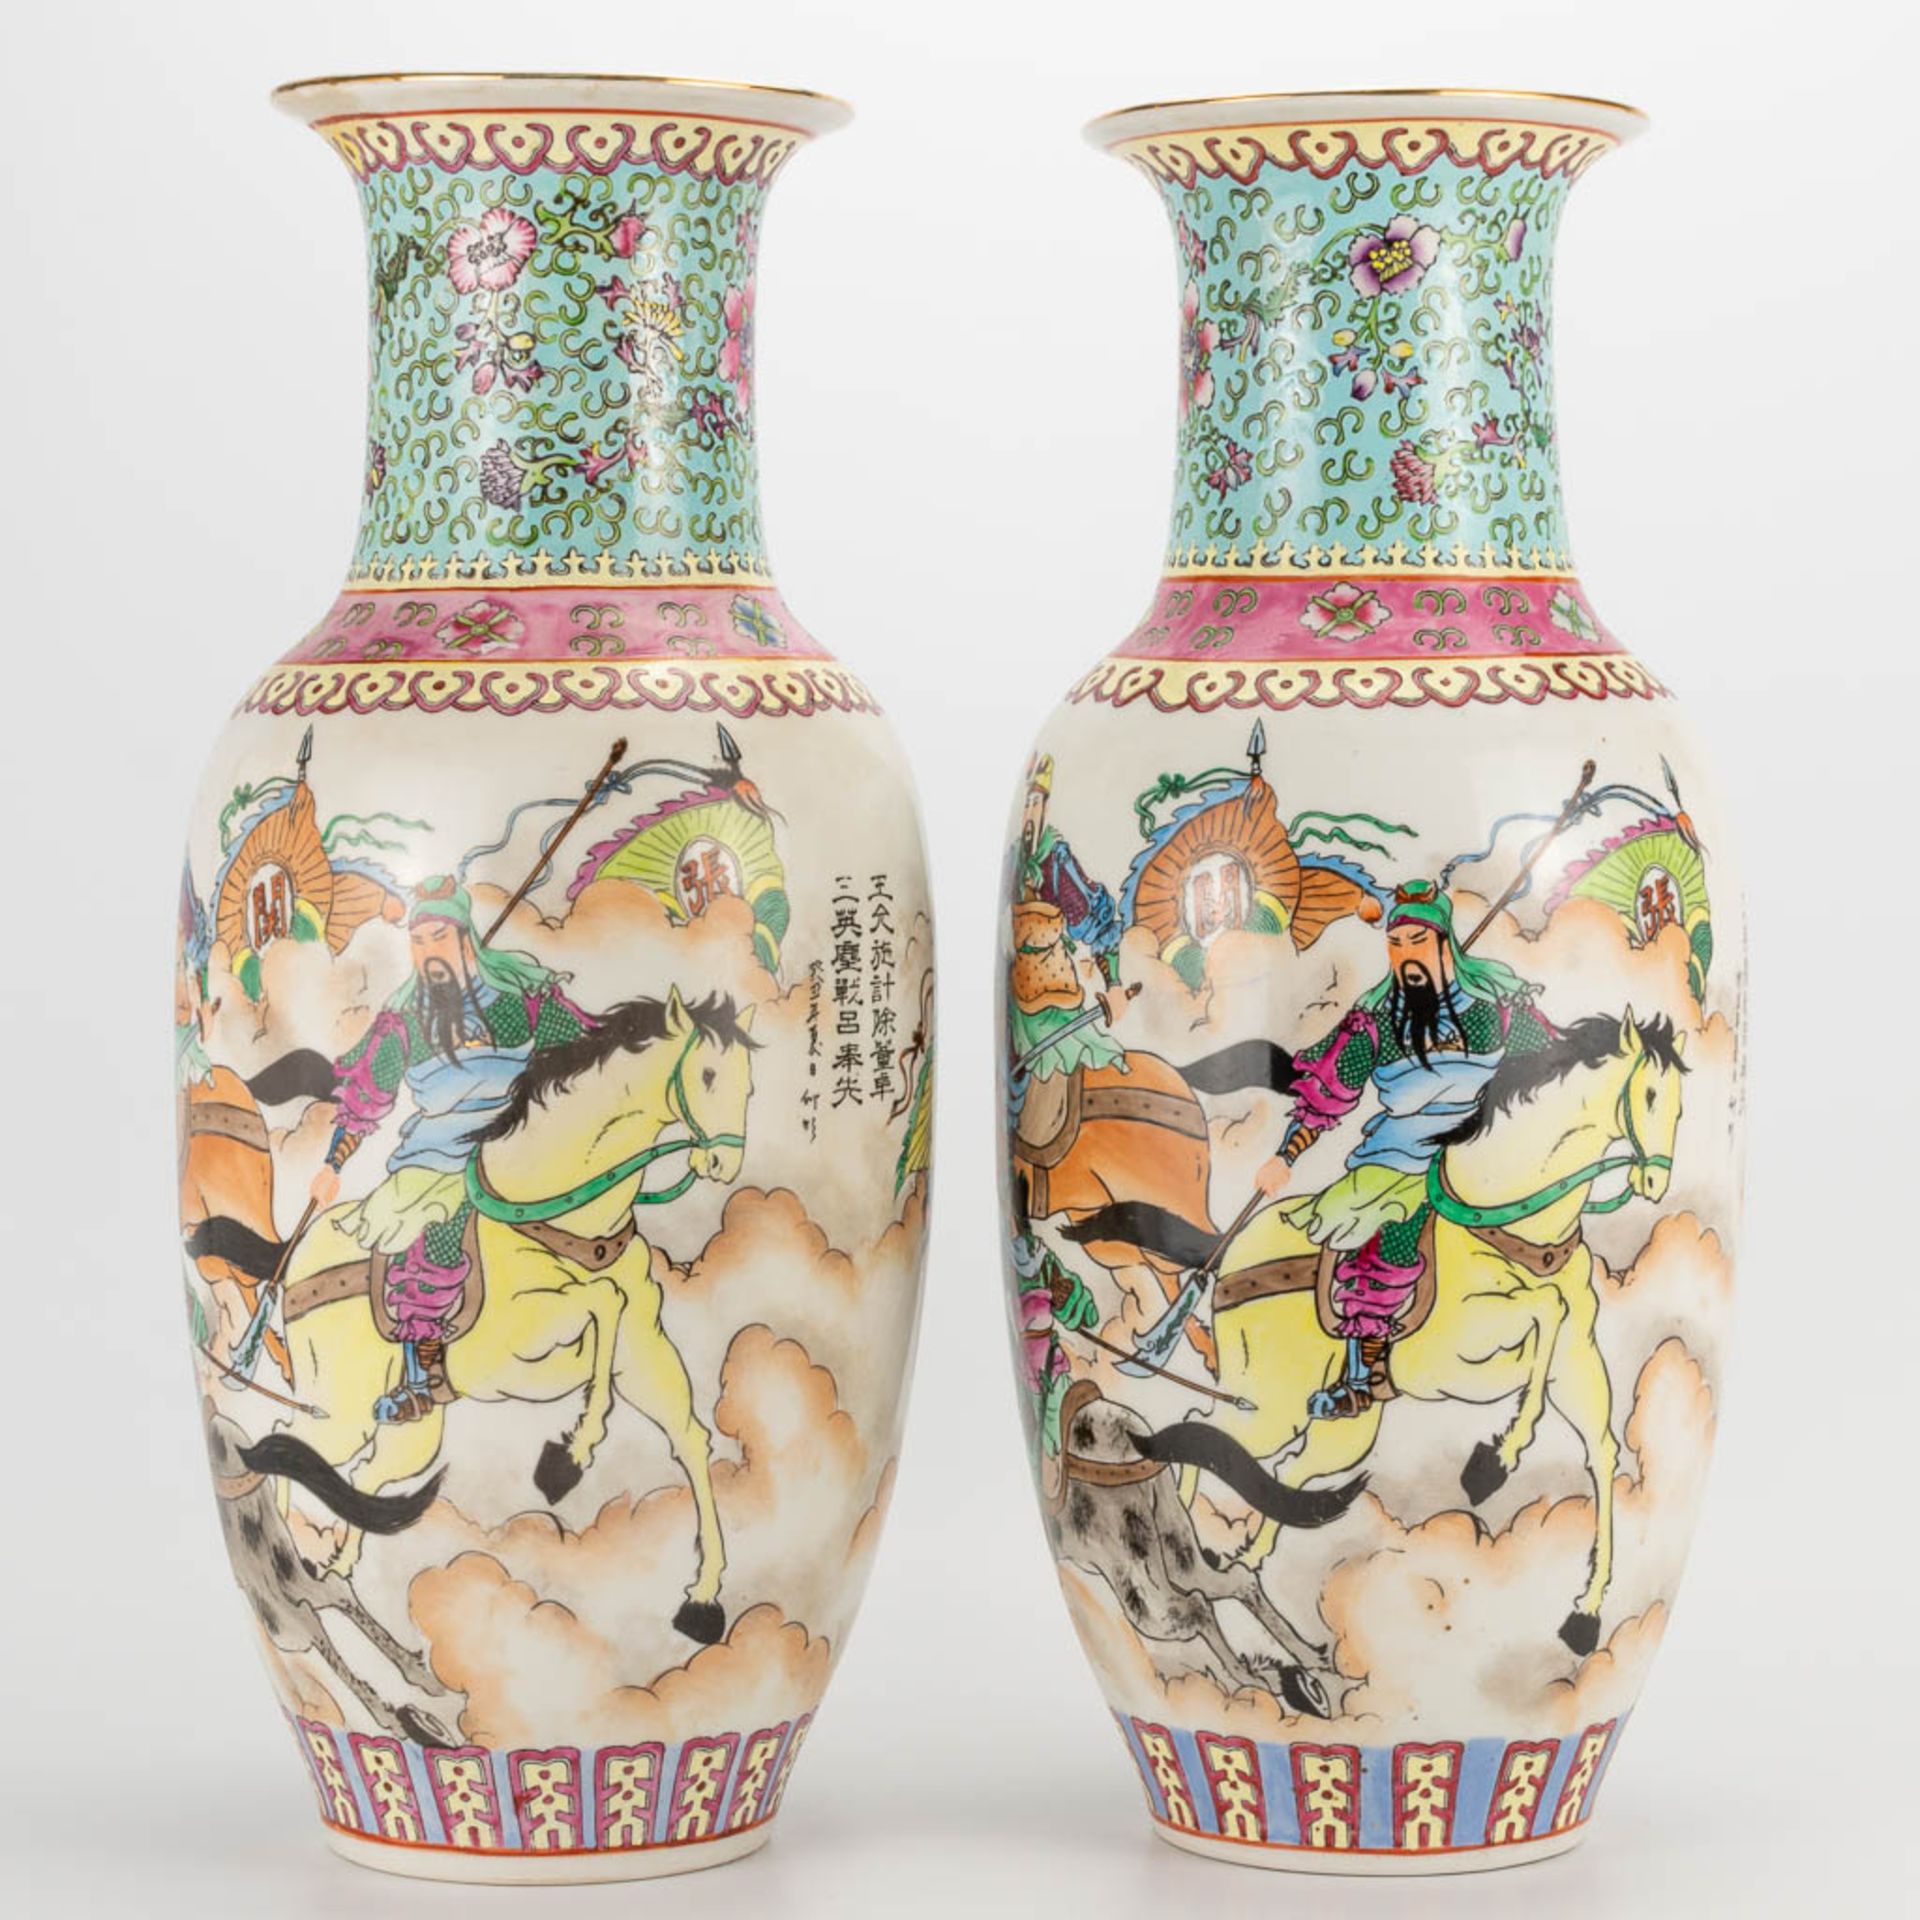 A pair of vases made of Chinese porcelain with decors of knights. 20th century. (46 x 18 cm) - Image 12 of 27